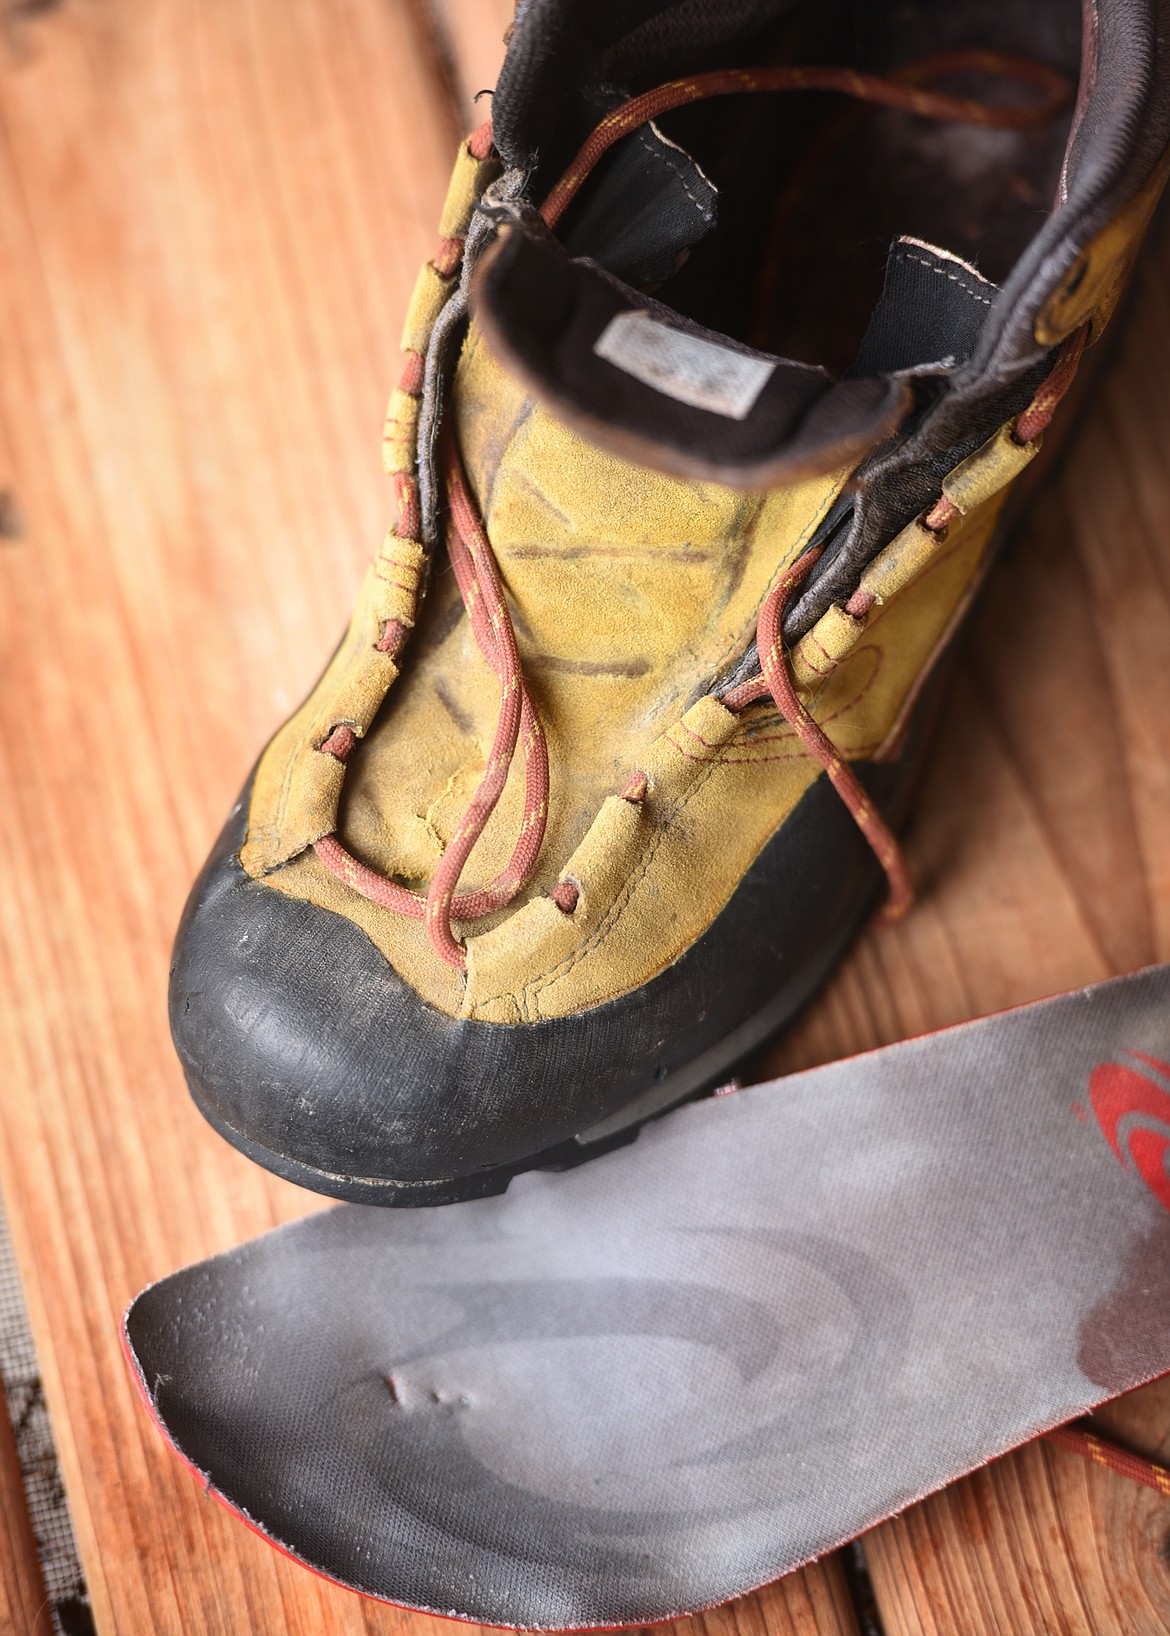 Detail photo of Anders Broste&#146;s left book. Broste said he was told that a grizzly bear bite could be as strong as 1,200 pounds per inch. His boot has penetrating teeth marks in both the top and bottom of the shoe and even the insert he wore was broken through.
(Brenda Ahearn/Daily Inter Lake)